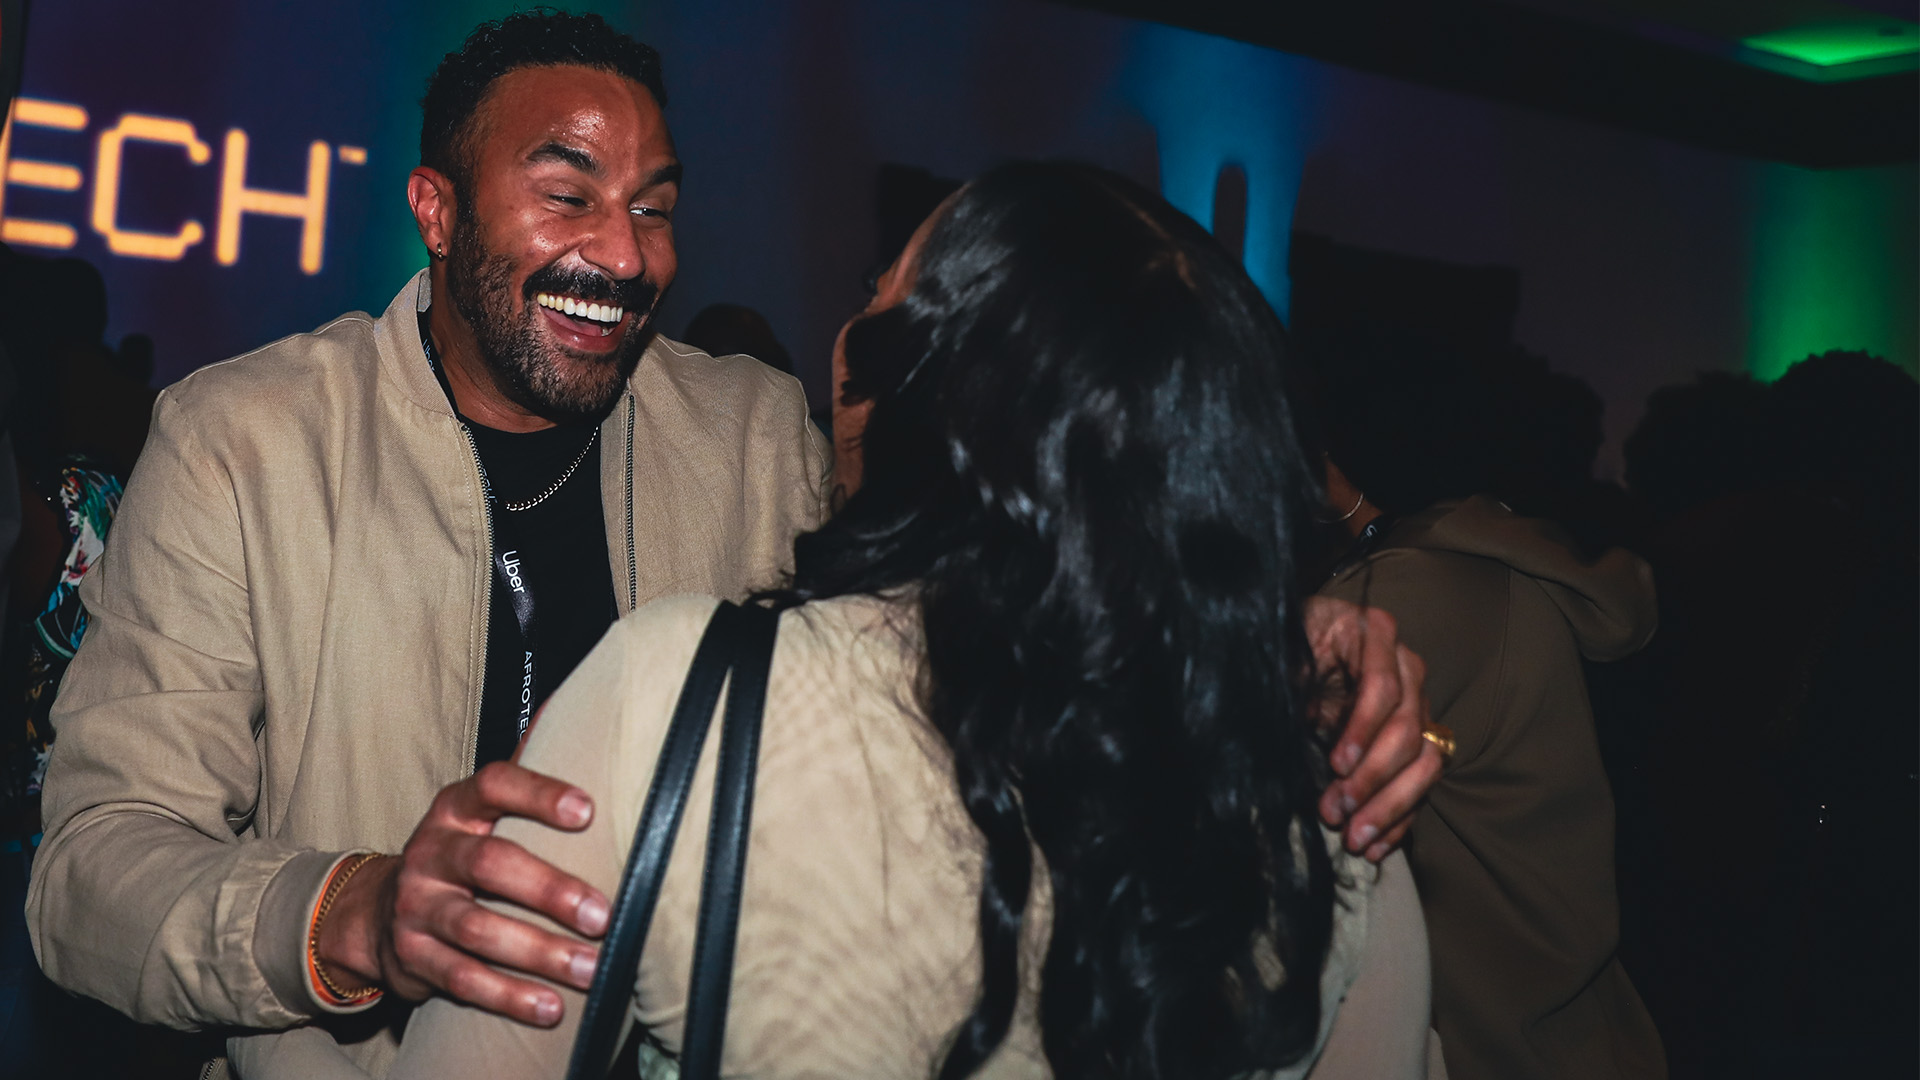 AFROTECH™ Announces The Meetup Series To Connect Tech Innovators, Trailblazers, And Creatives